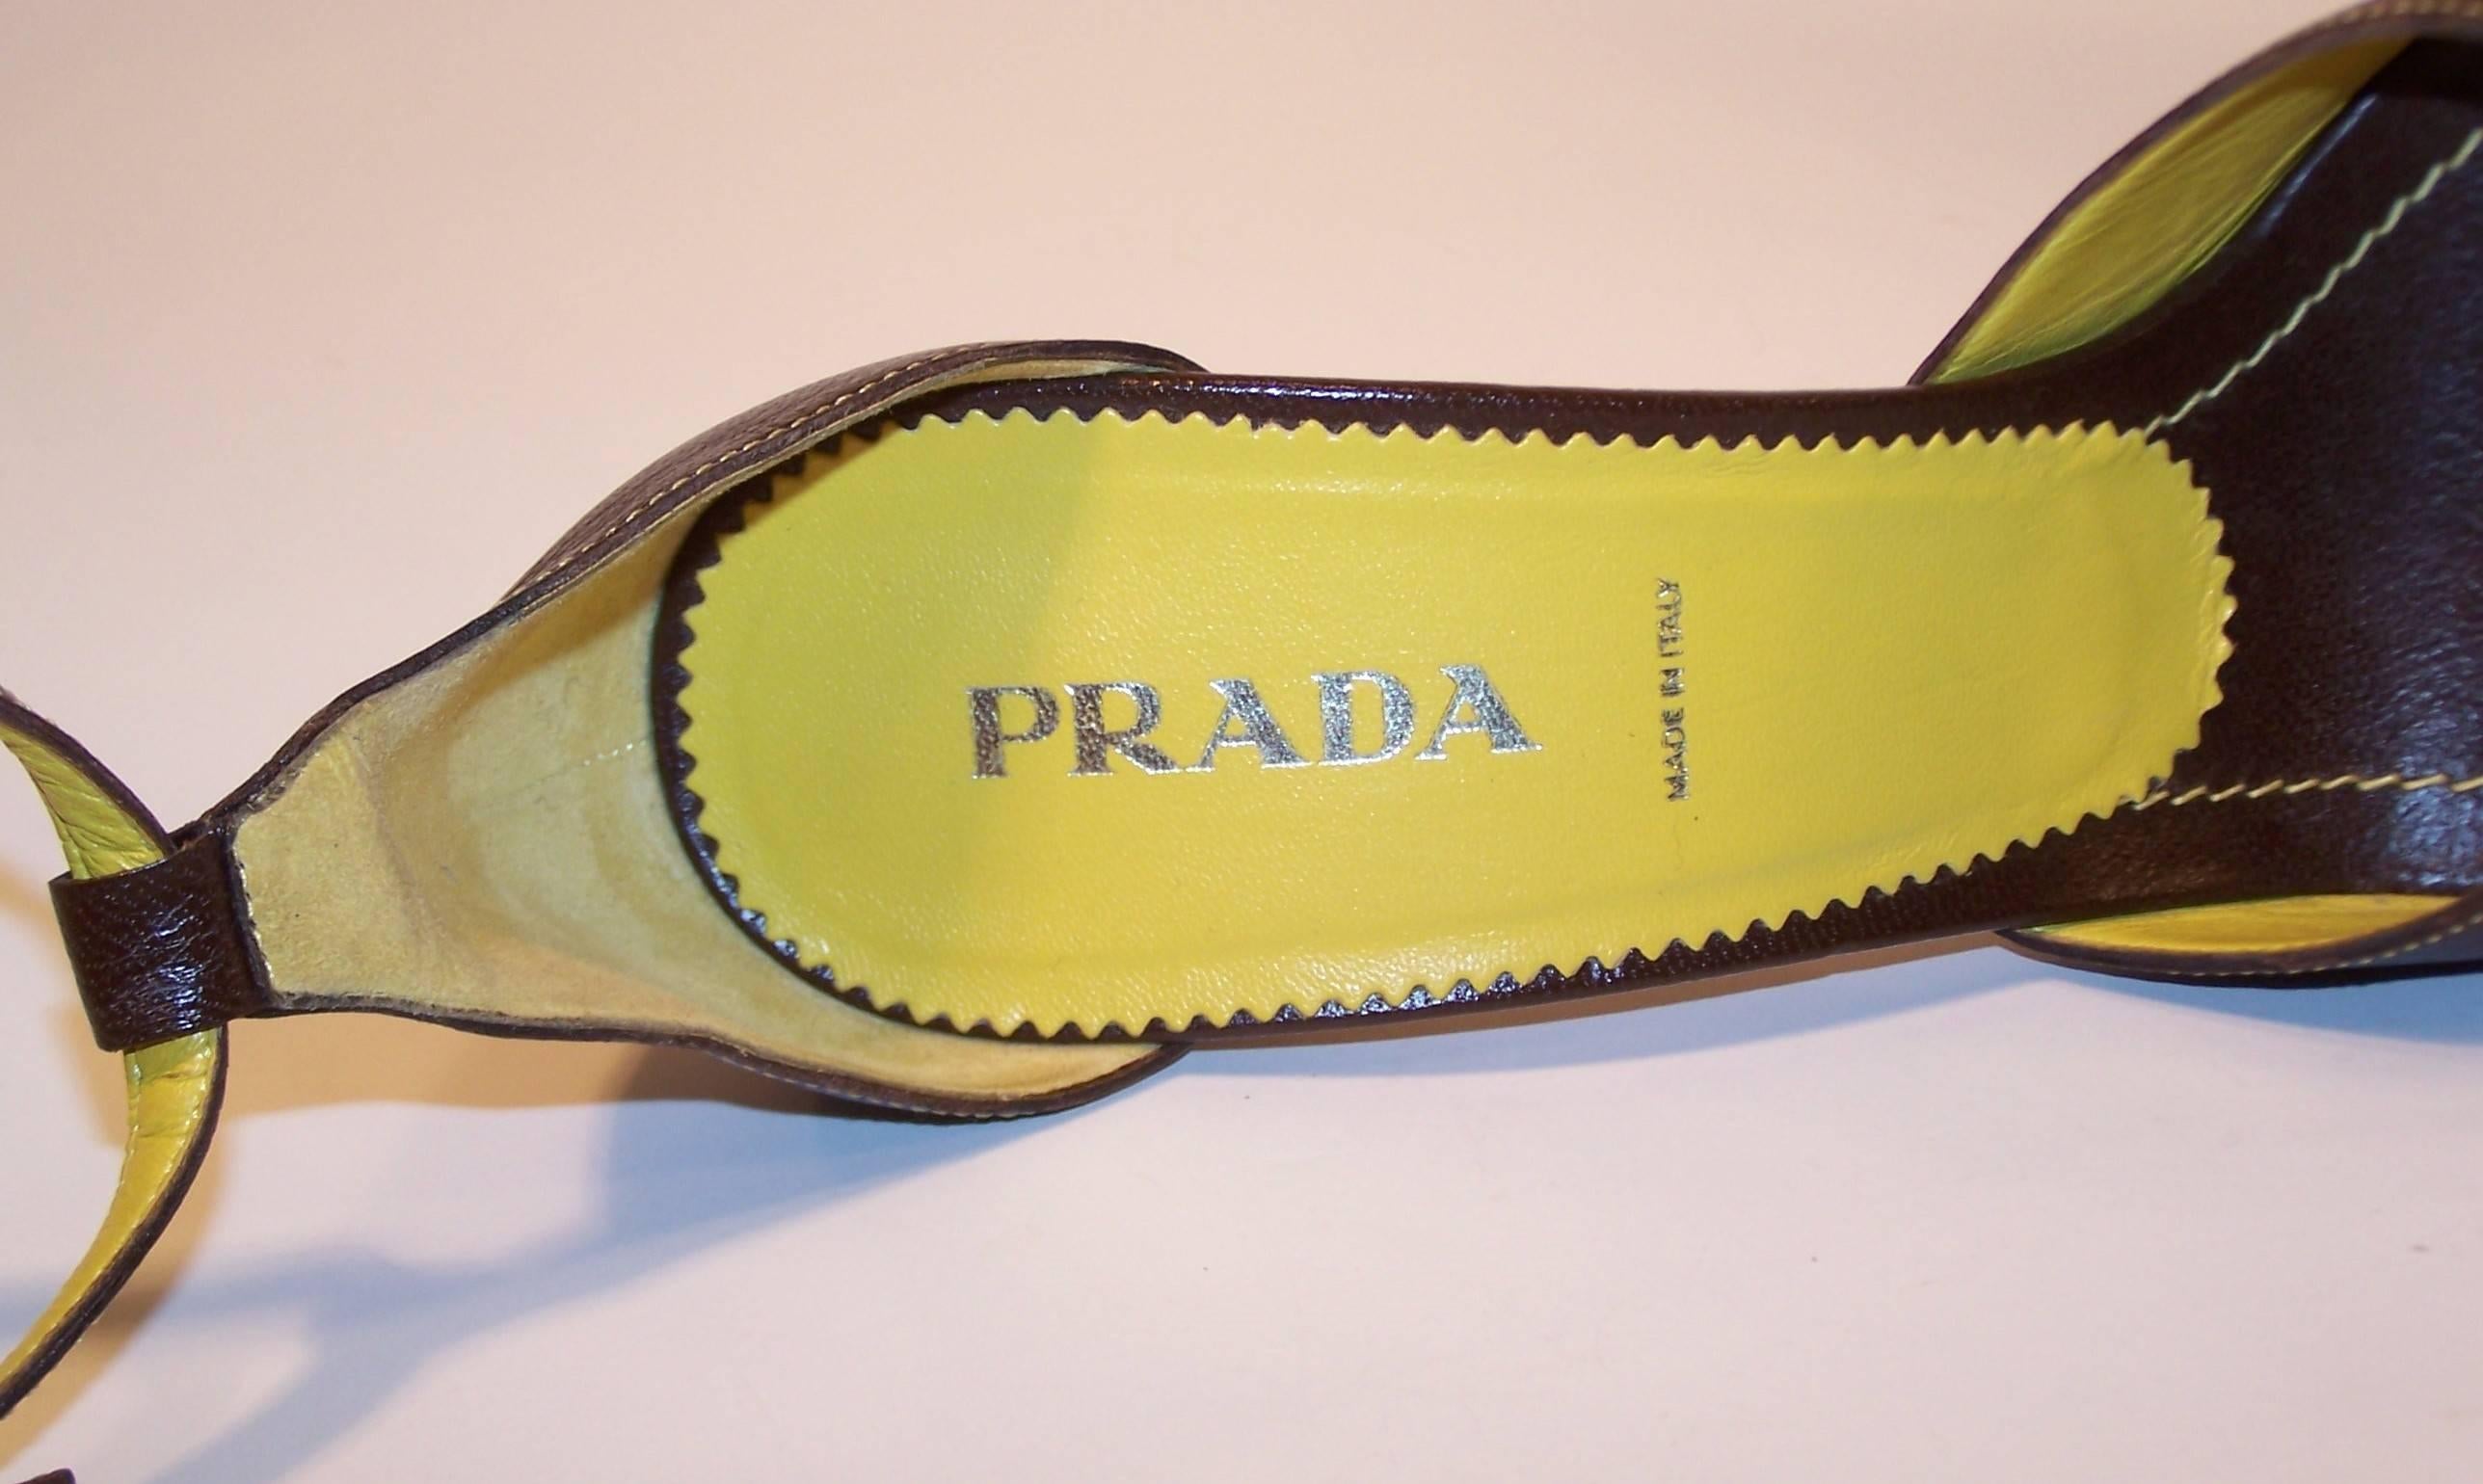 Prada Brown Leather Sandals With Ankle Straps & Buckles Sz 38 6